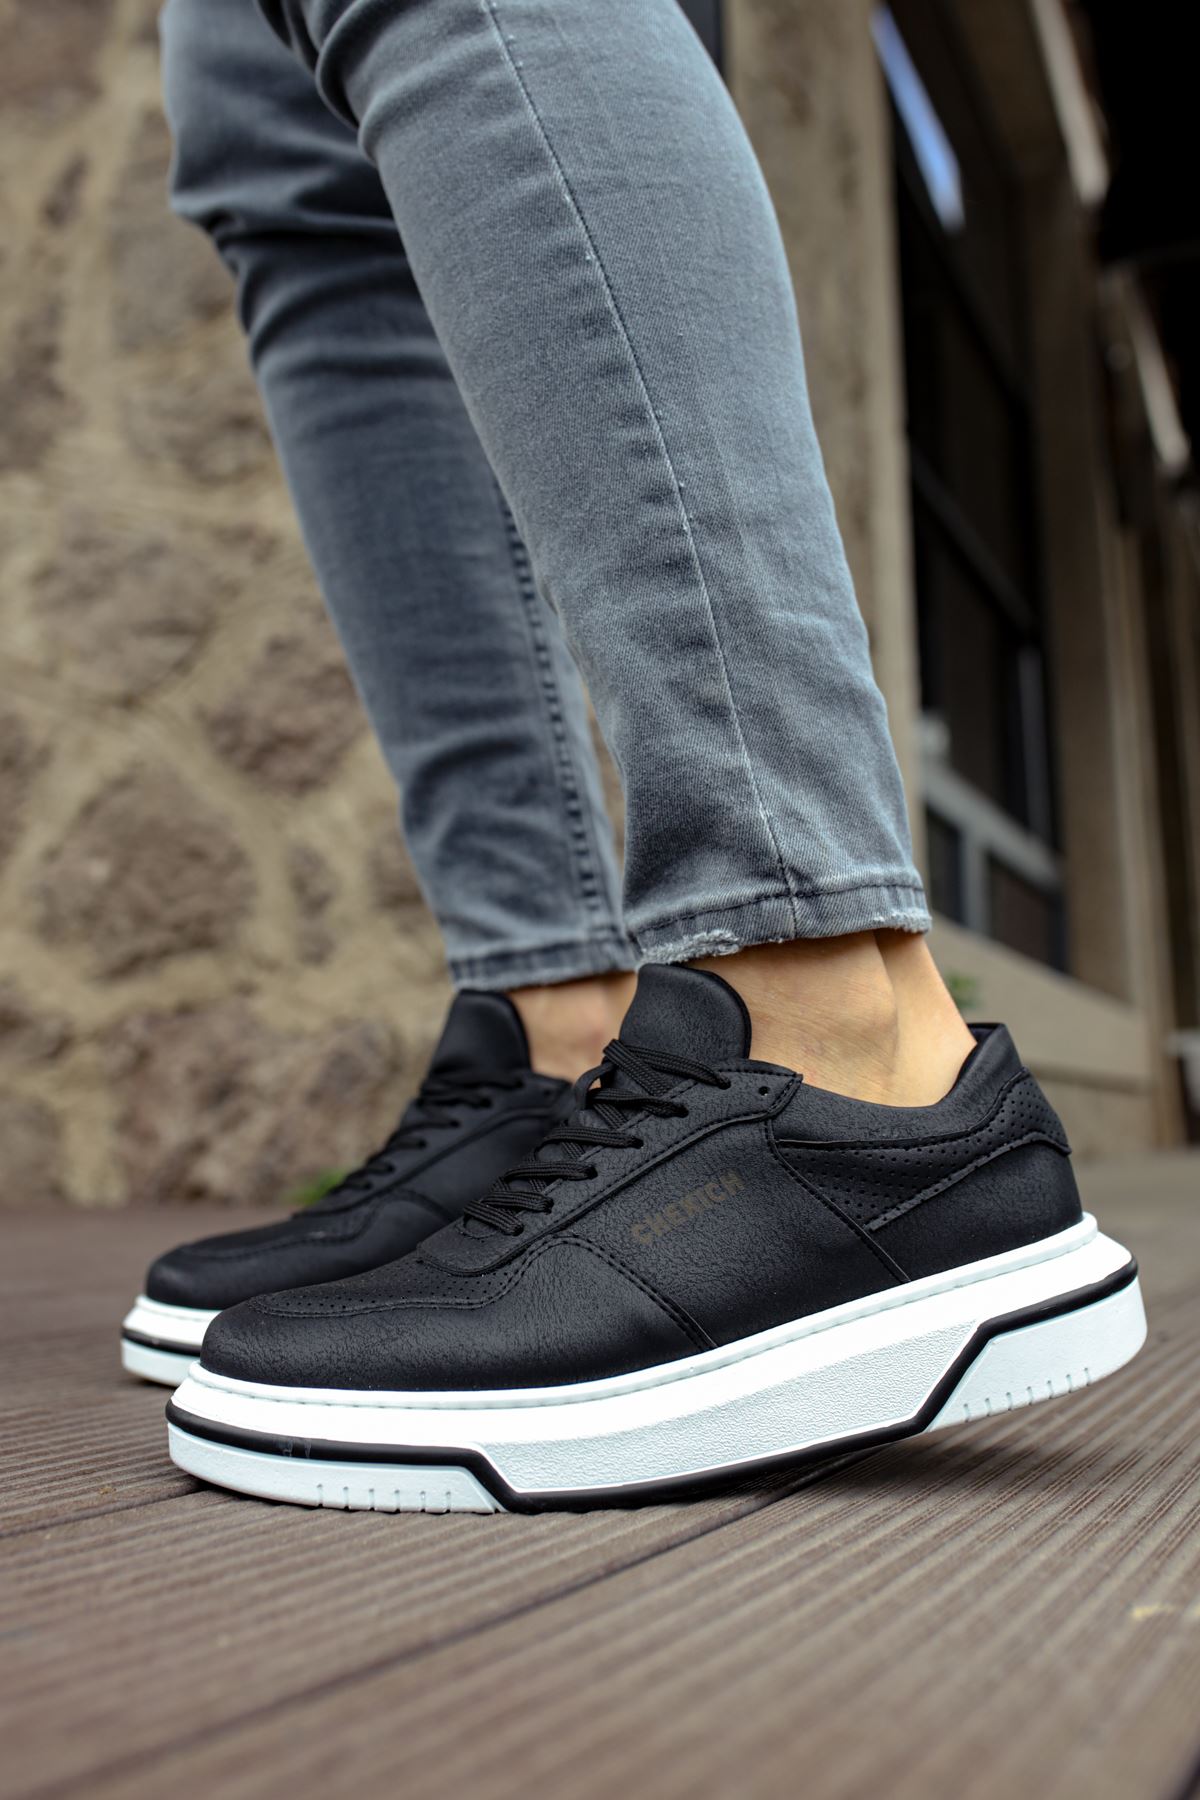 Chekich Men's & Women's Shoes Black Faux Leather Solid Color Lace Up Spring and Autumn Seasons Comfortable Sneakers Flexible Fashion 2021 Casual Odorless High Sole Orthopedic Lightweight Breathable Flat Suits CH075 V5